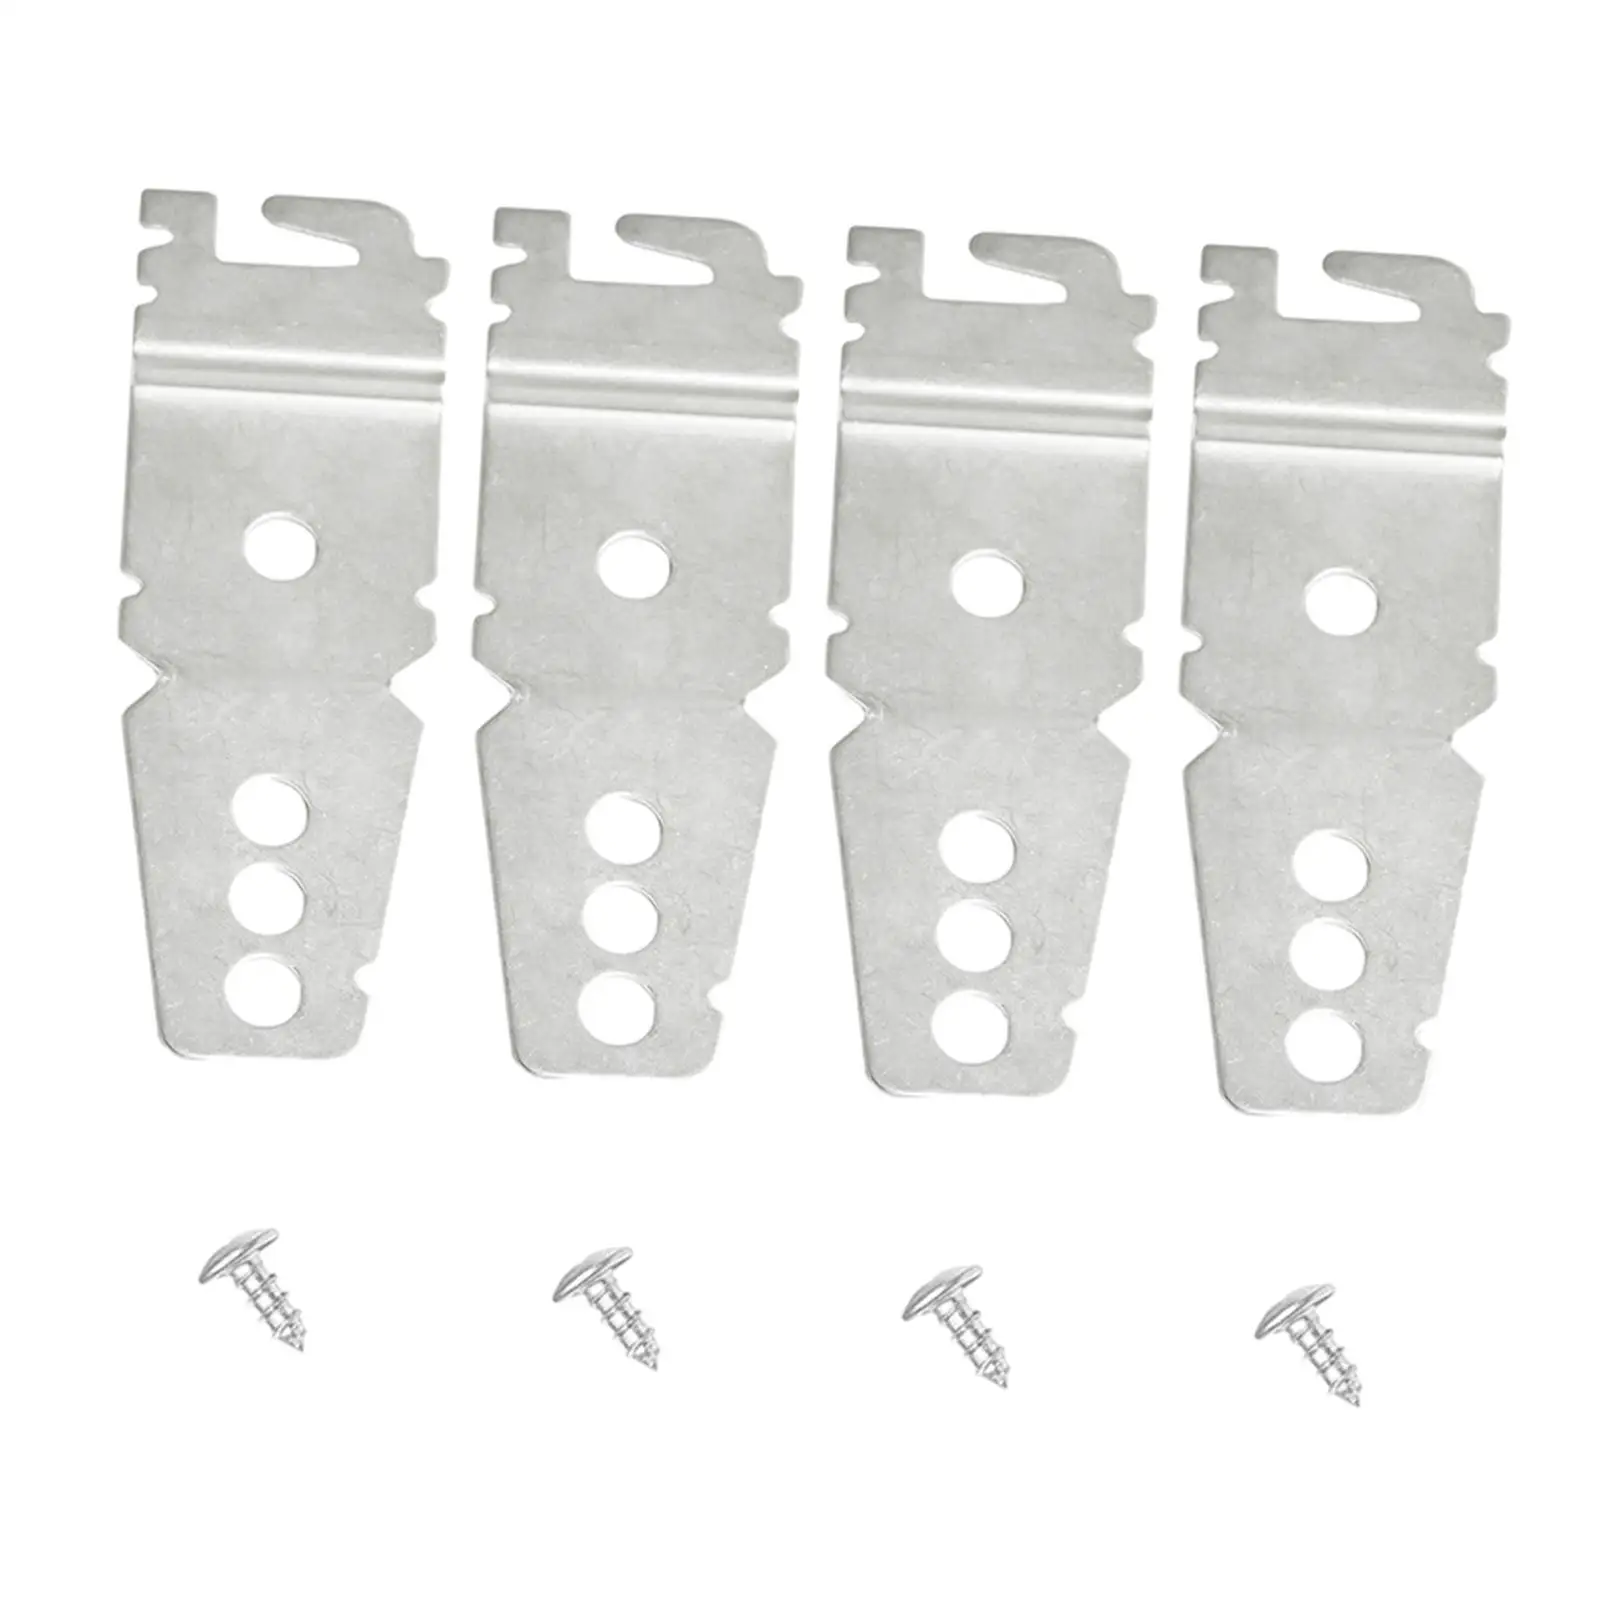 4Pcs 8269145 Dishwasher Mounting Bracket Stable Performance Parts Rustproof Accessories for WP8269145 PS393134 AP3039168